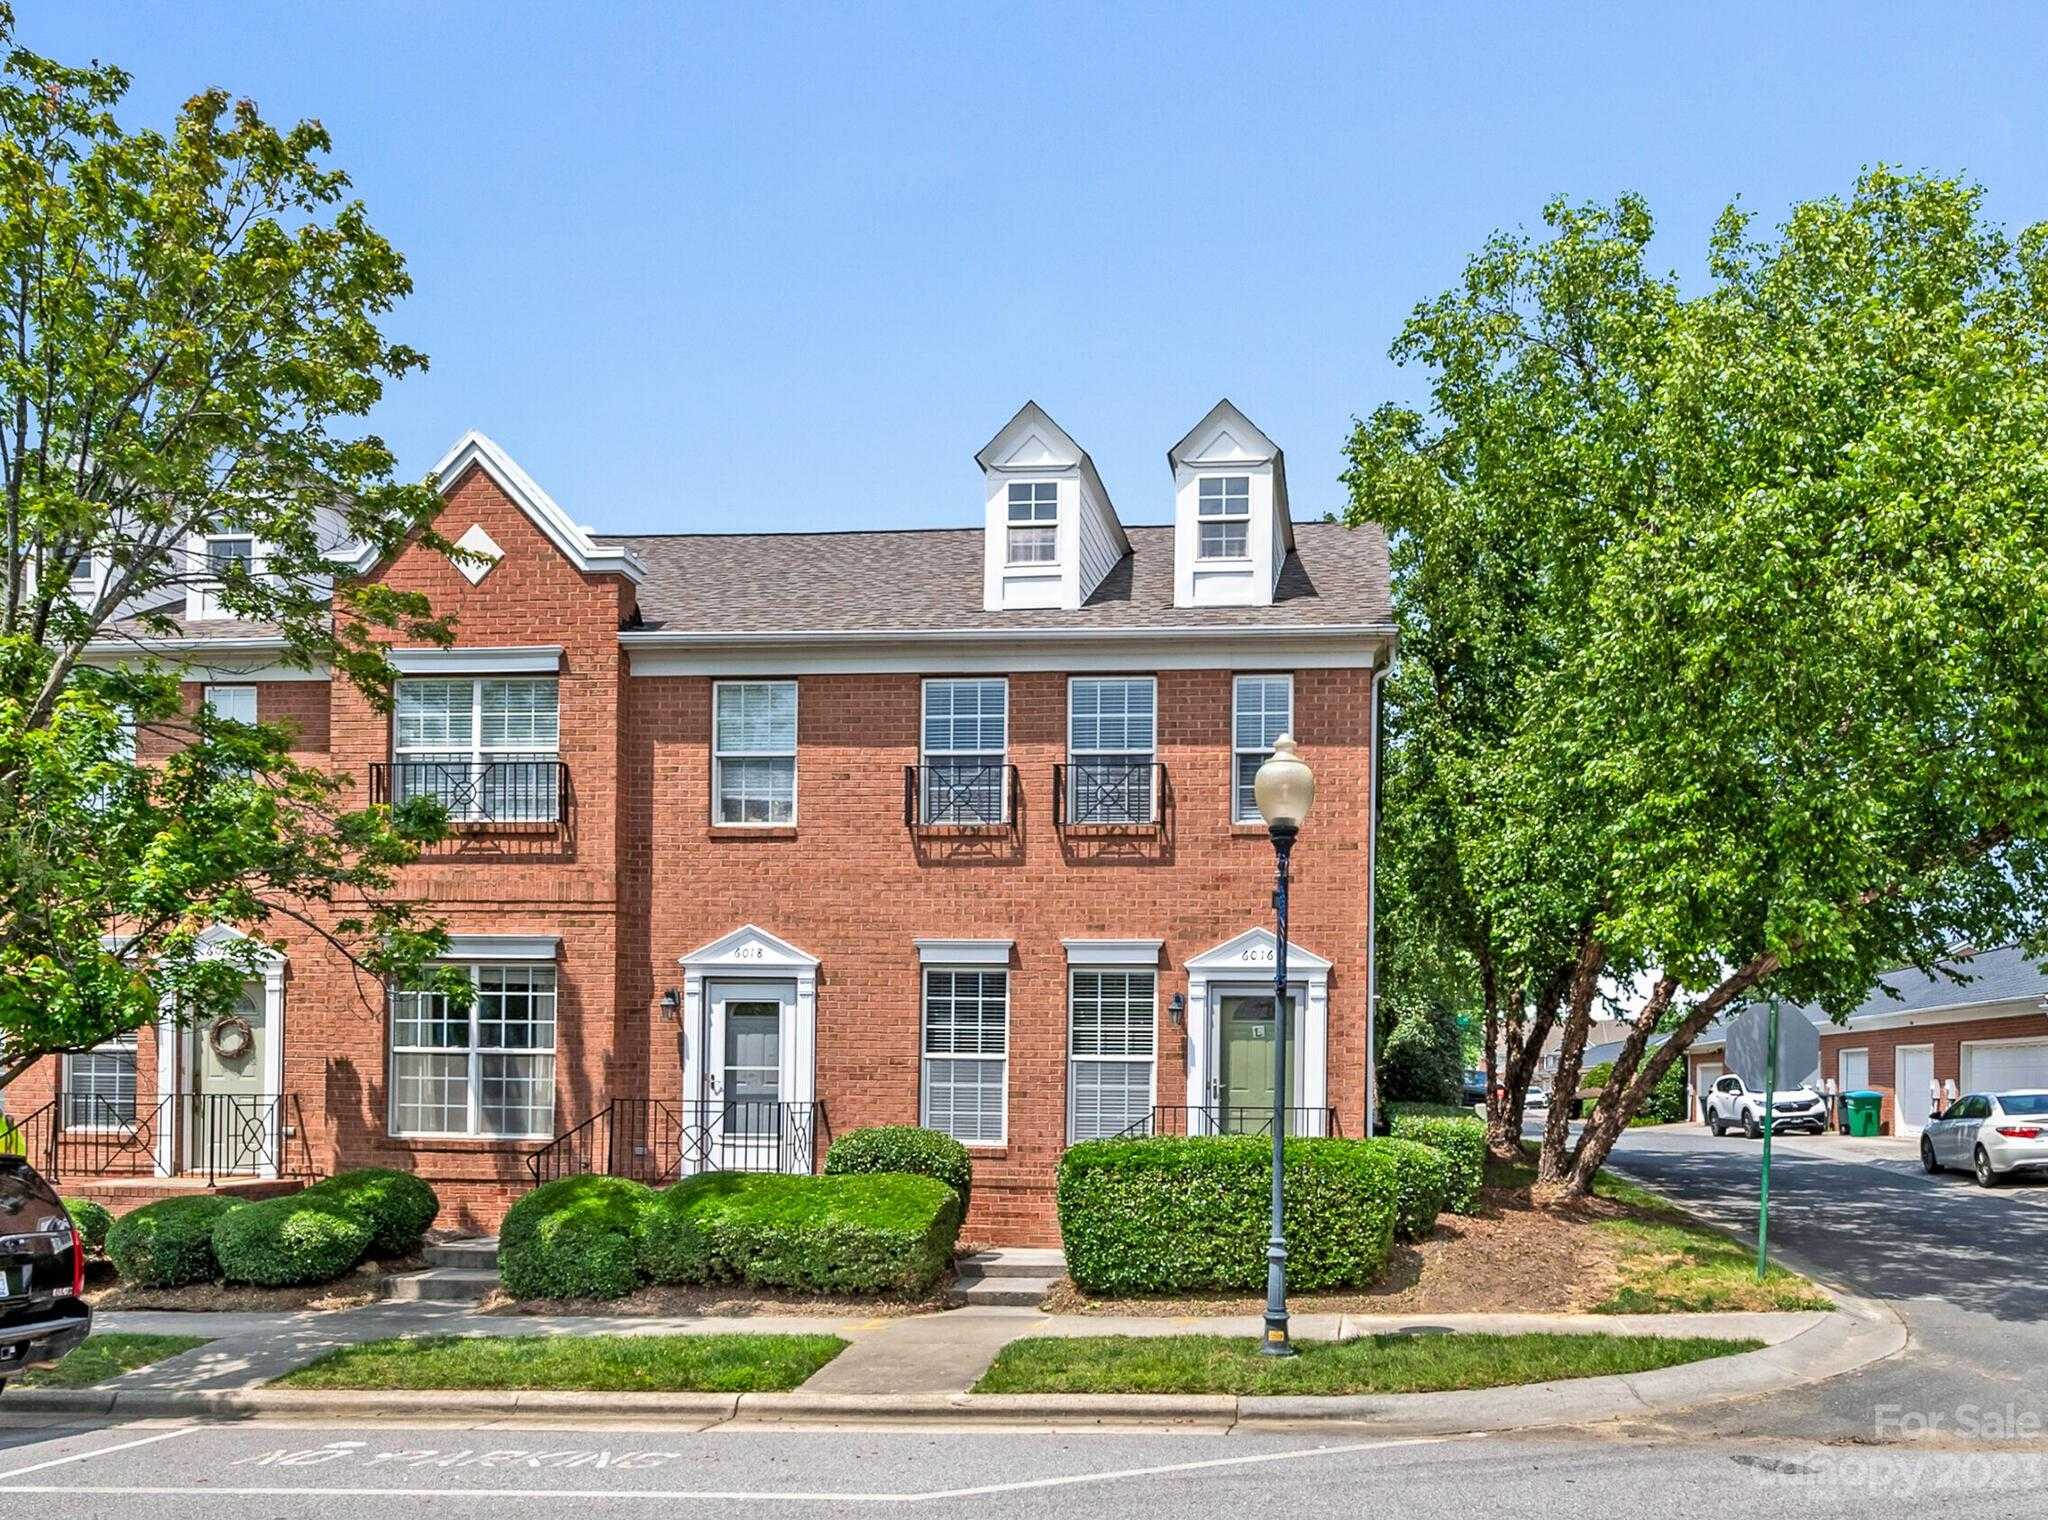 View Indian Trail, NC 28079 townhome